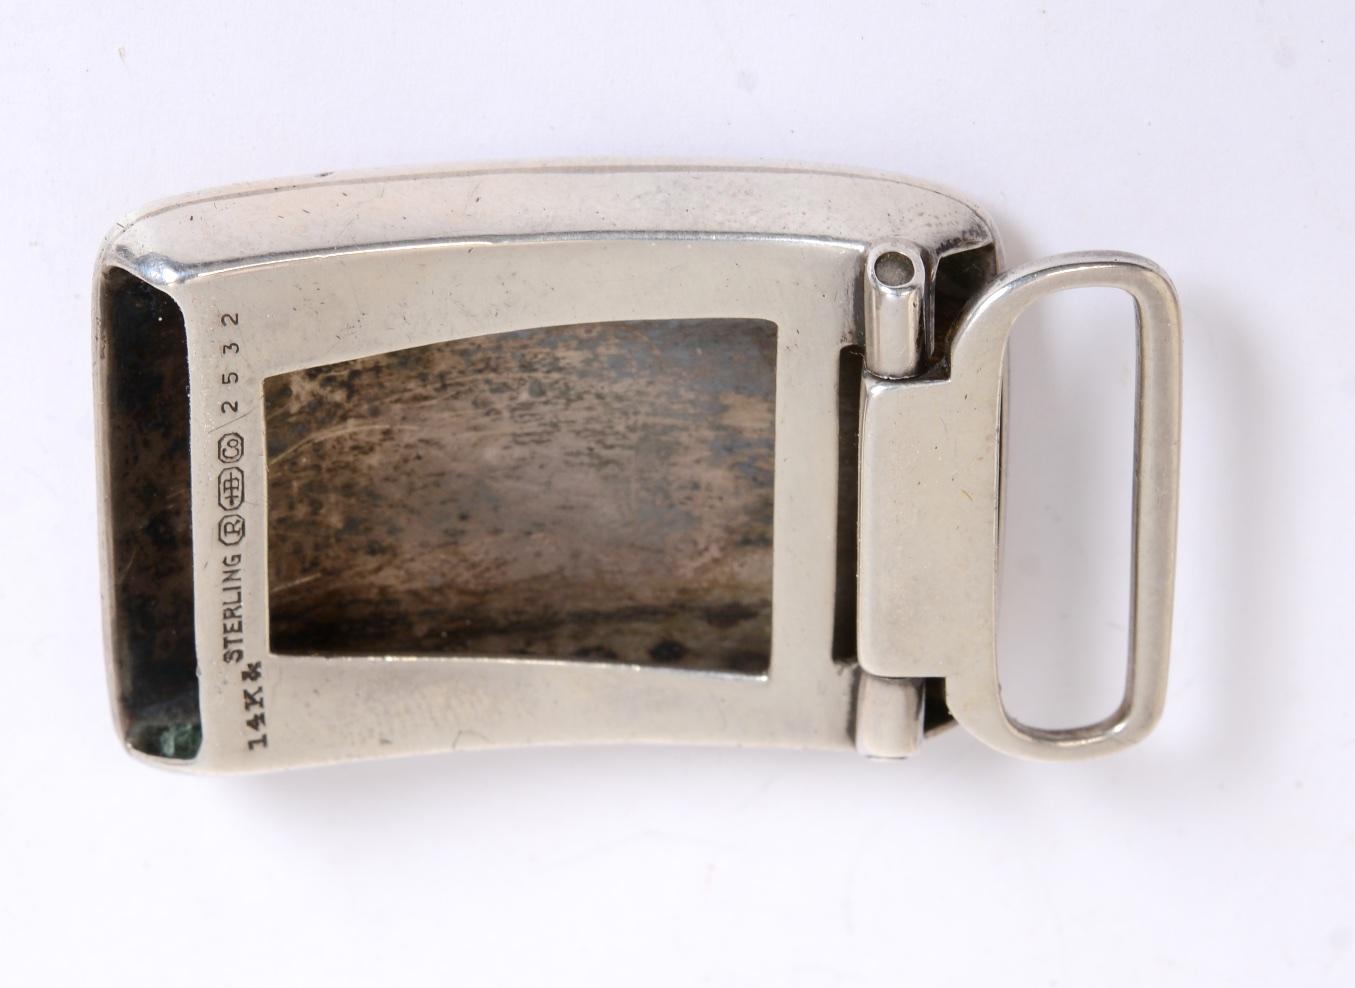 Sterling Silver and 14K Gold Belt Buckle by R. Blackinton & Co Initaled WSG. The initials could be buffed out. R. Blackinton & Co. used this hallmark of the 